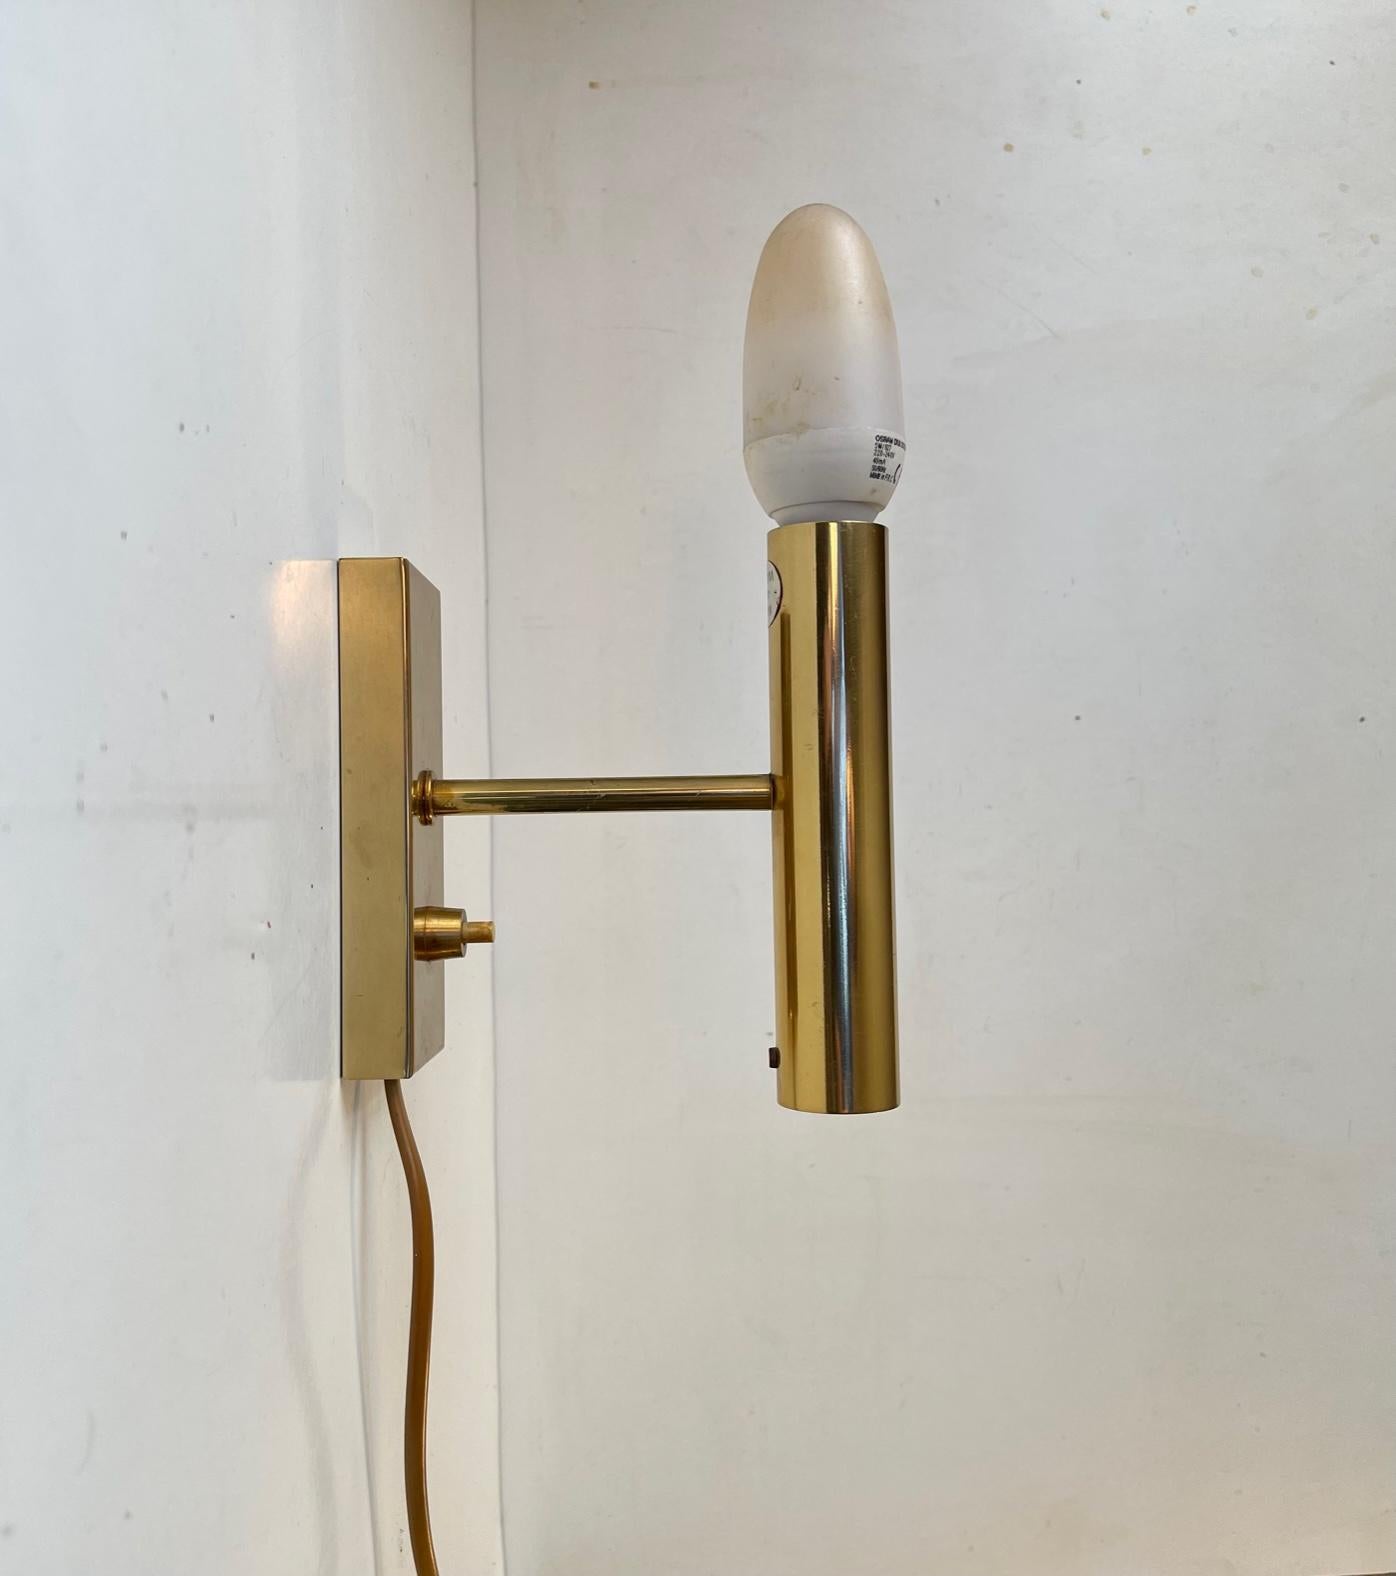 Late 20th Century Danish Modern Green Wall Sconce in Brass by Fog & Mørup, 1970s For Sale